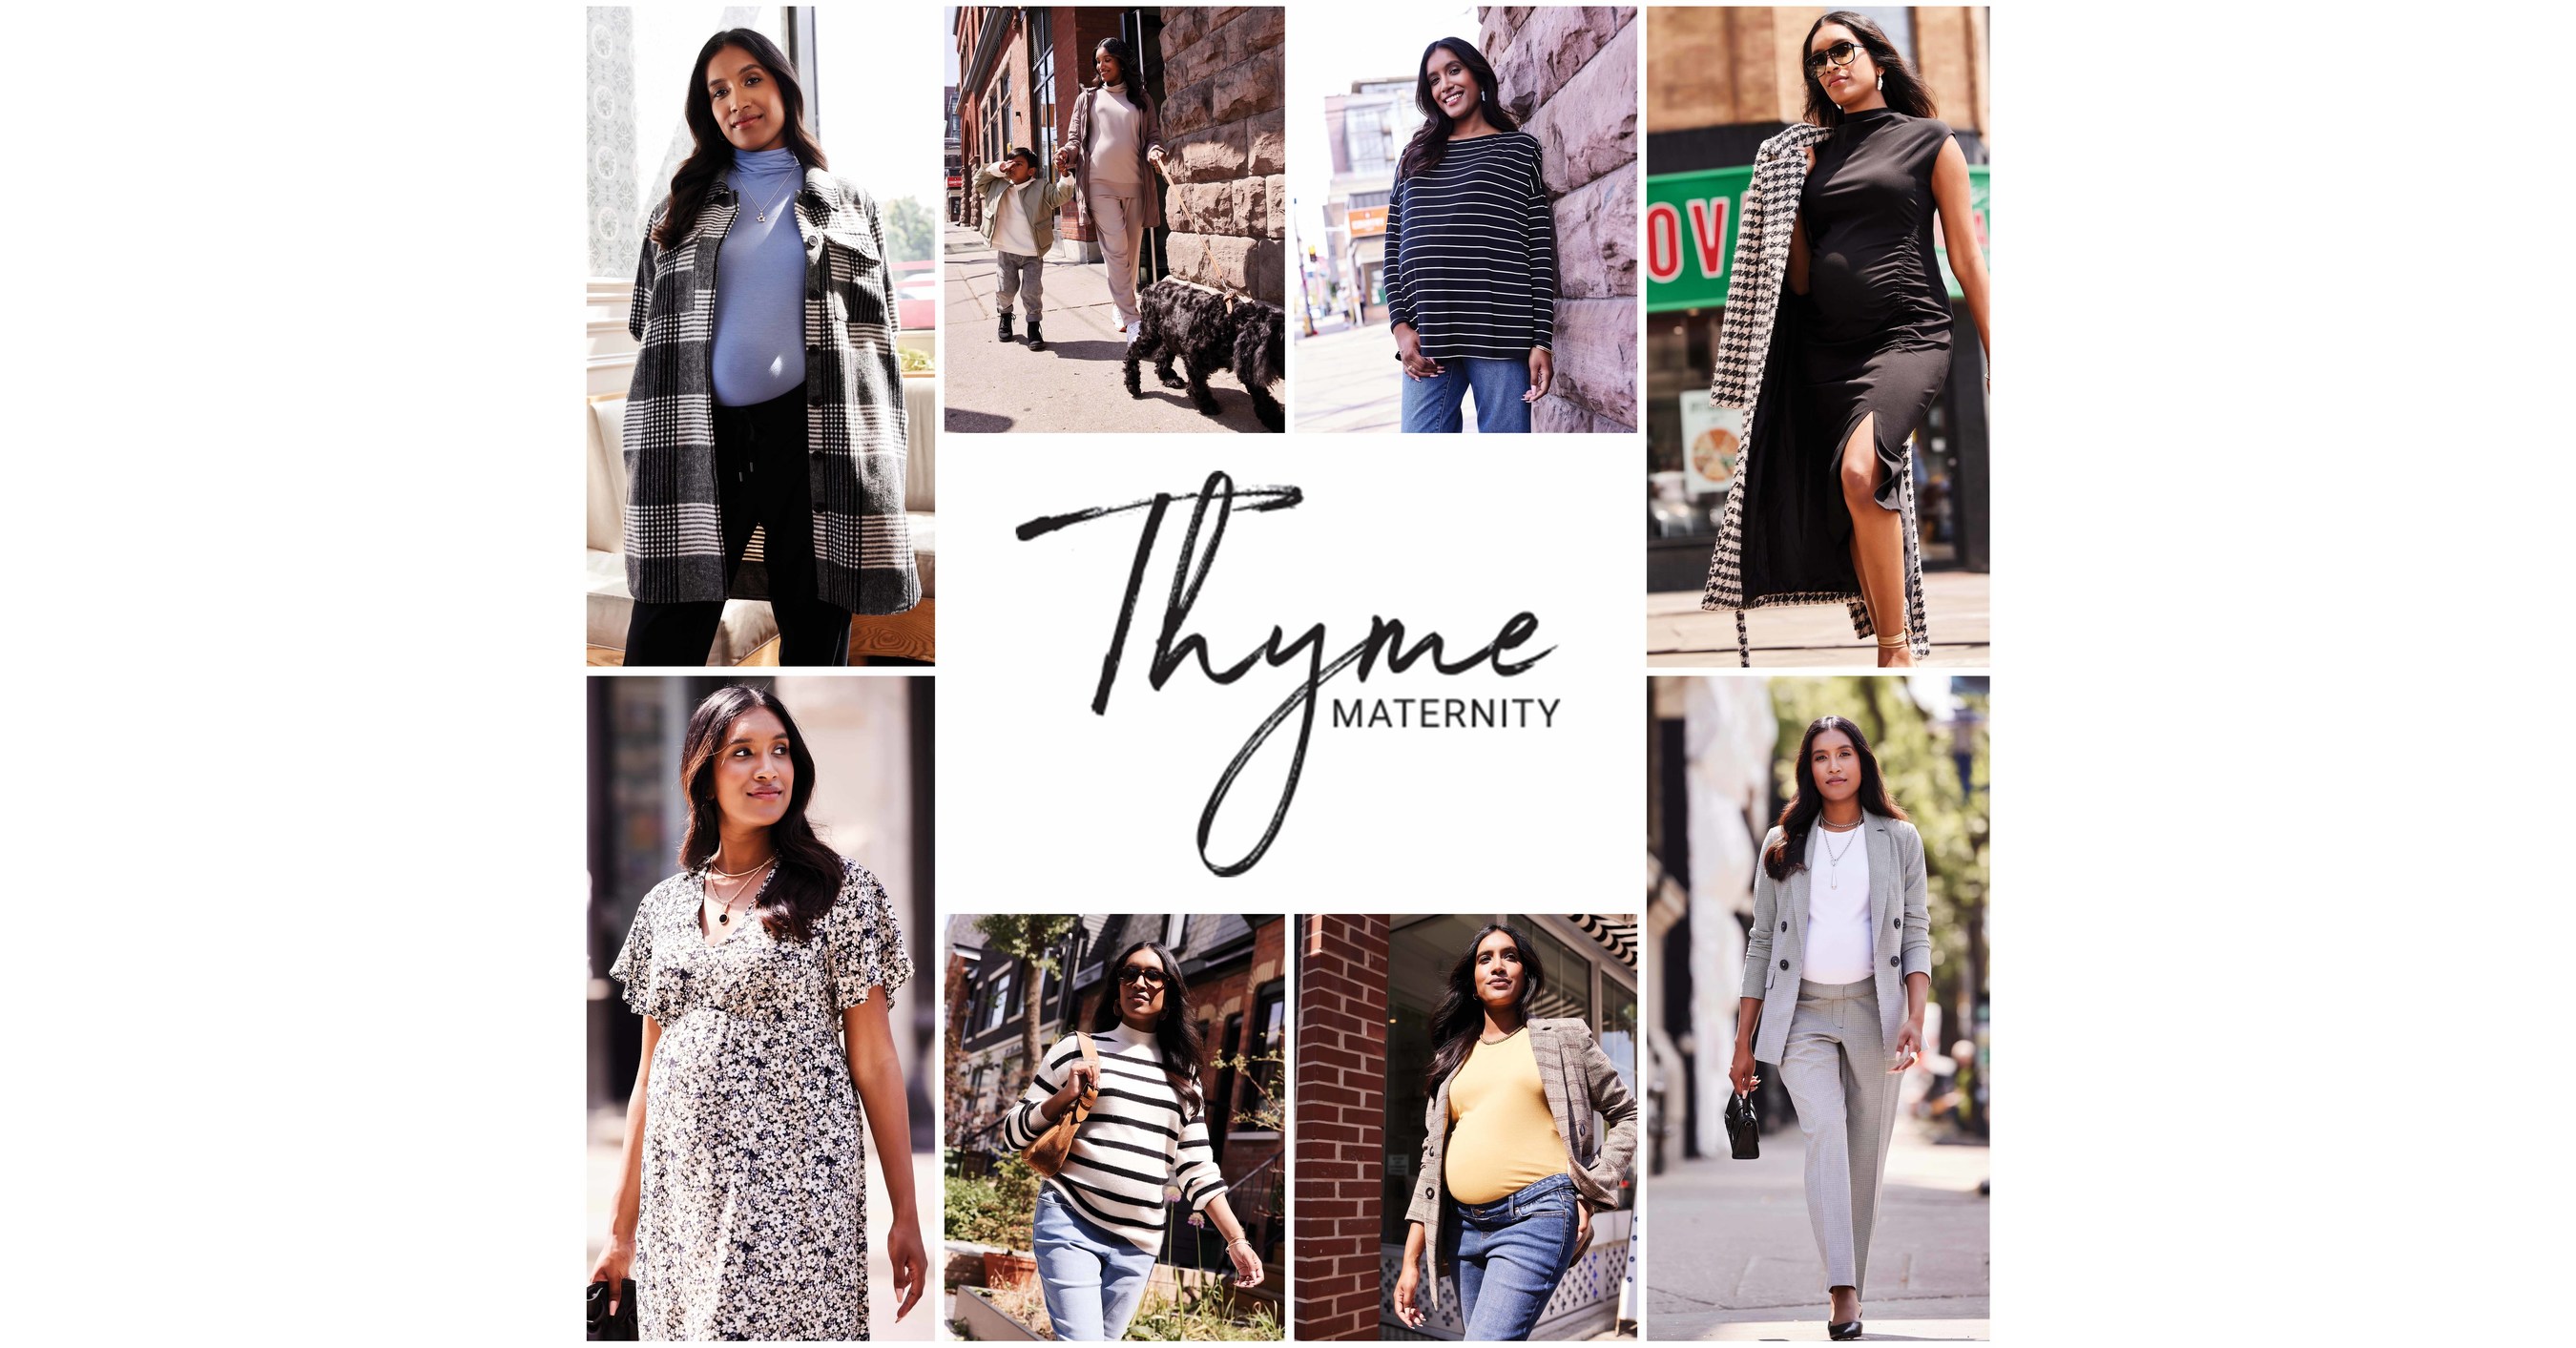 RW&CO. is pleased to launch the THYME MATERNITY collection starting THIS  FALL